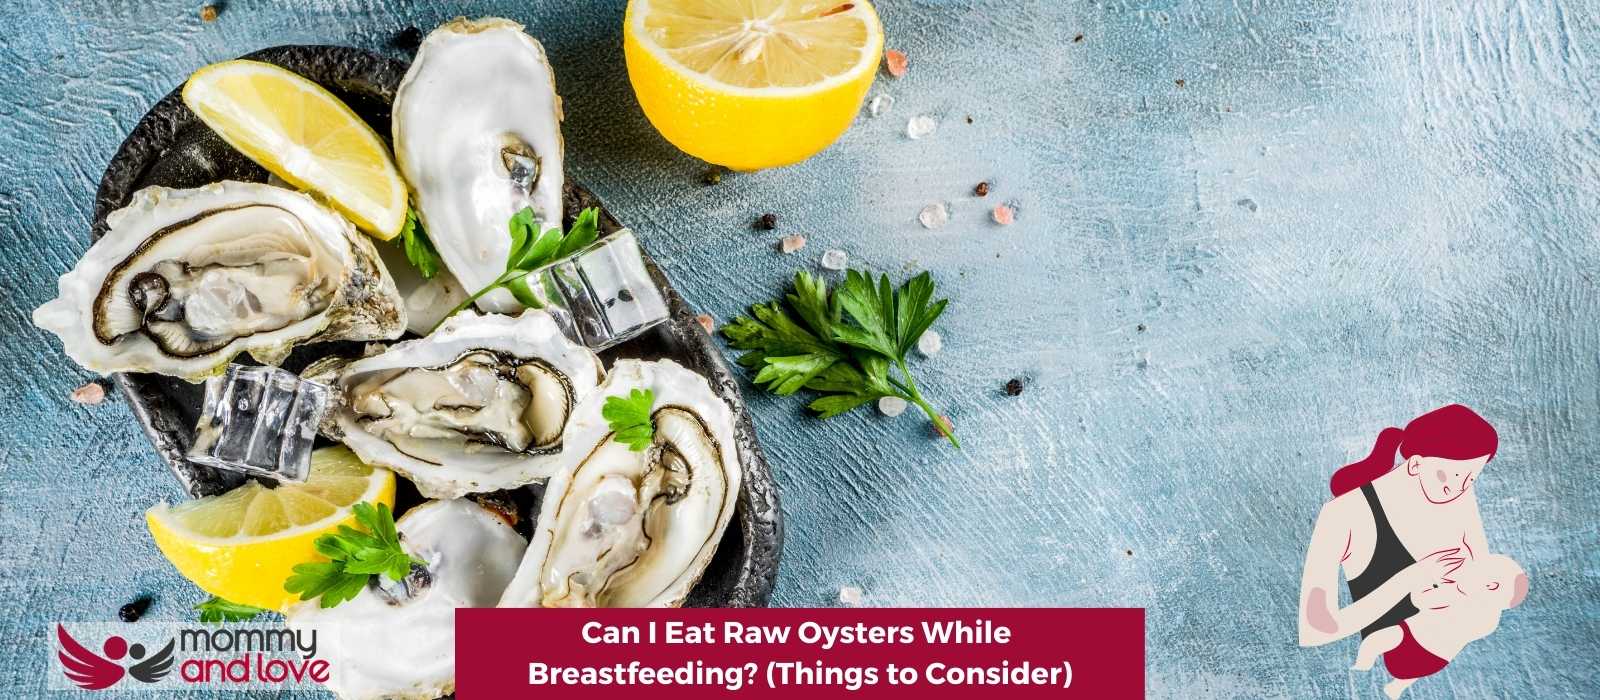 Can I Eat Raw Oysters While Breastfeeding? (Things to Consider)